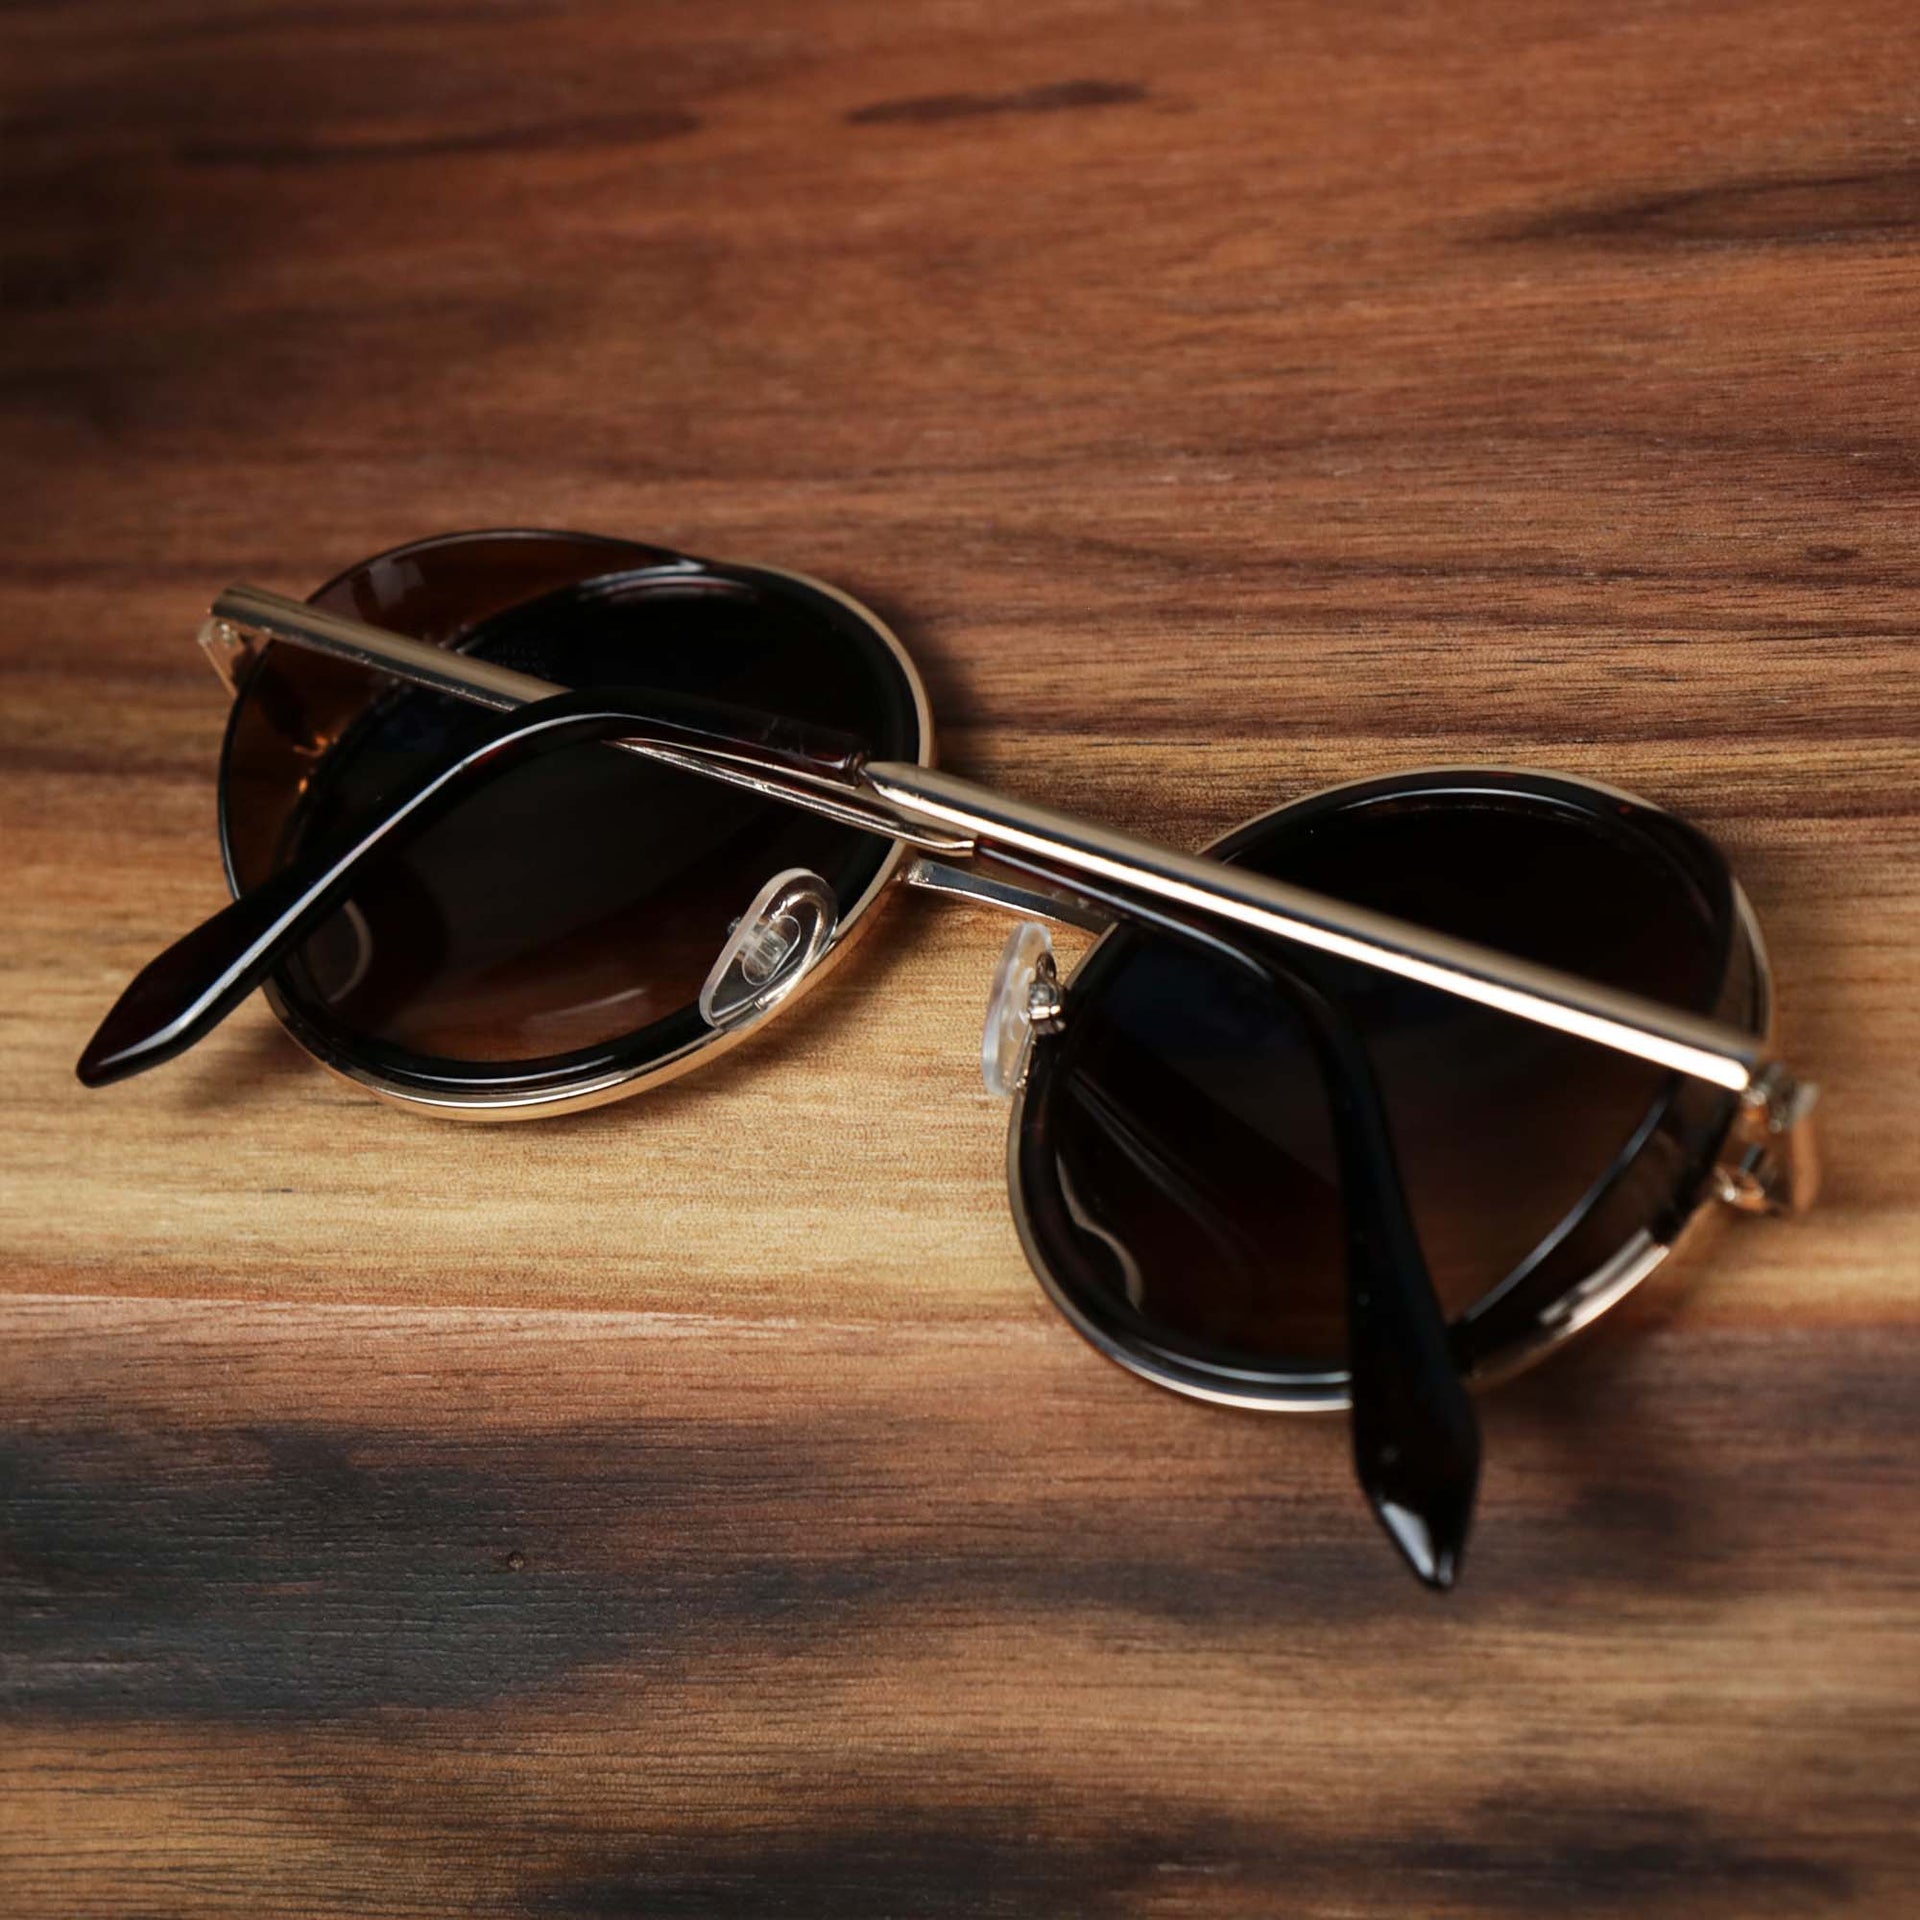 The Circle Frame Brown Lens Sunglasses with Tortoise Frame folded up